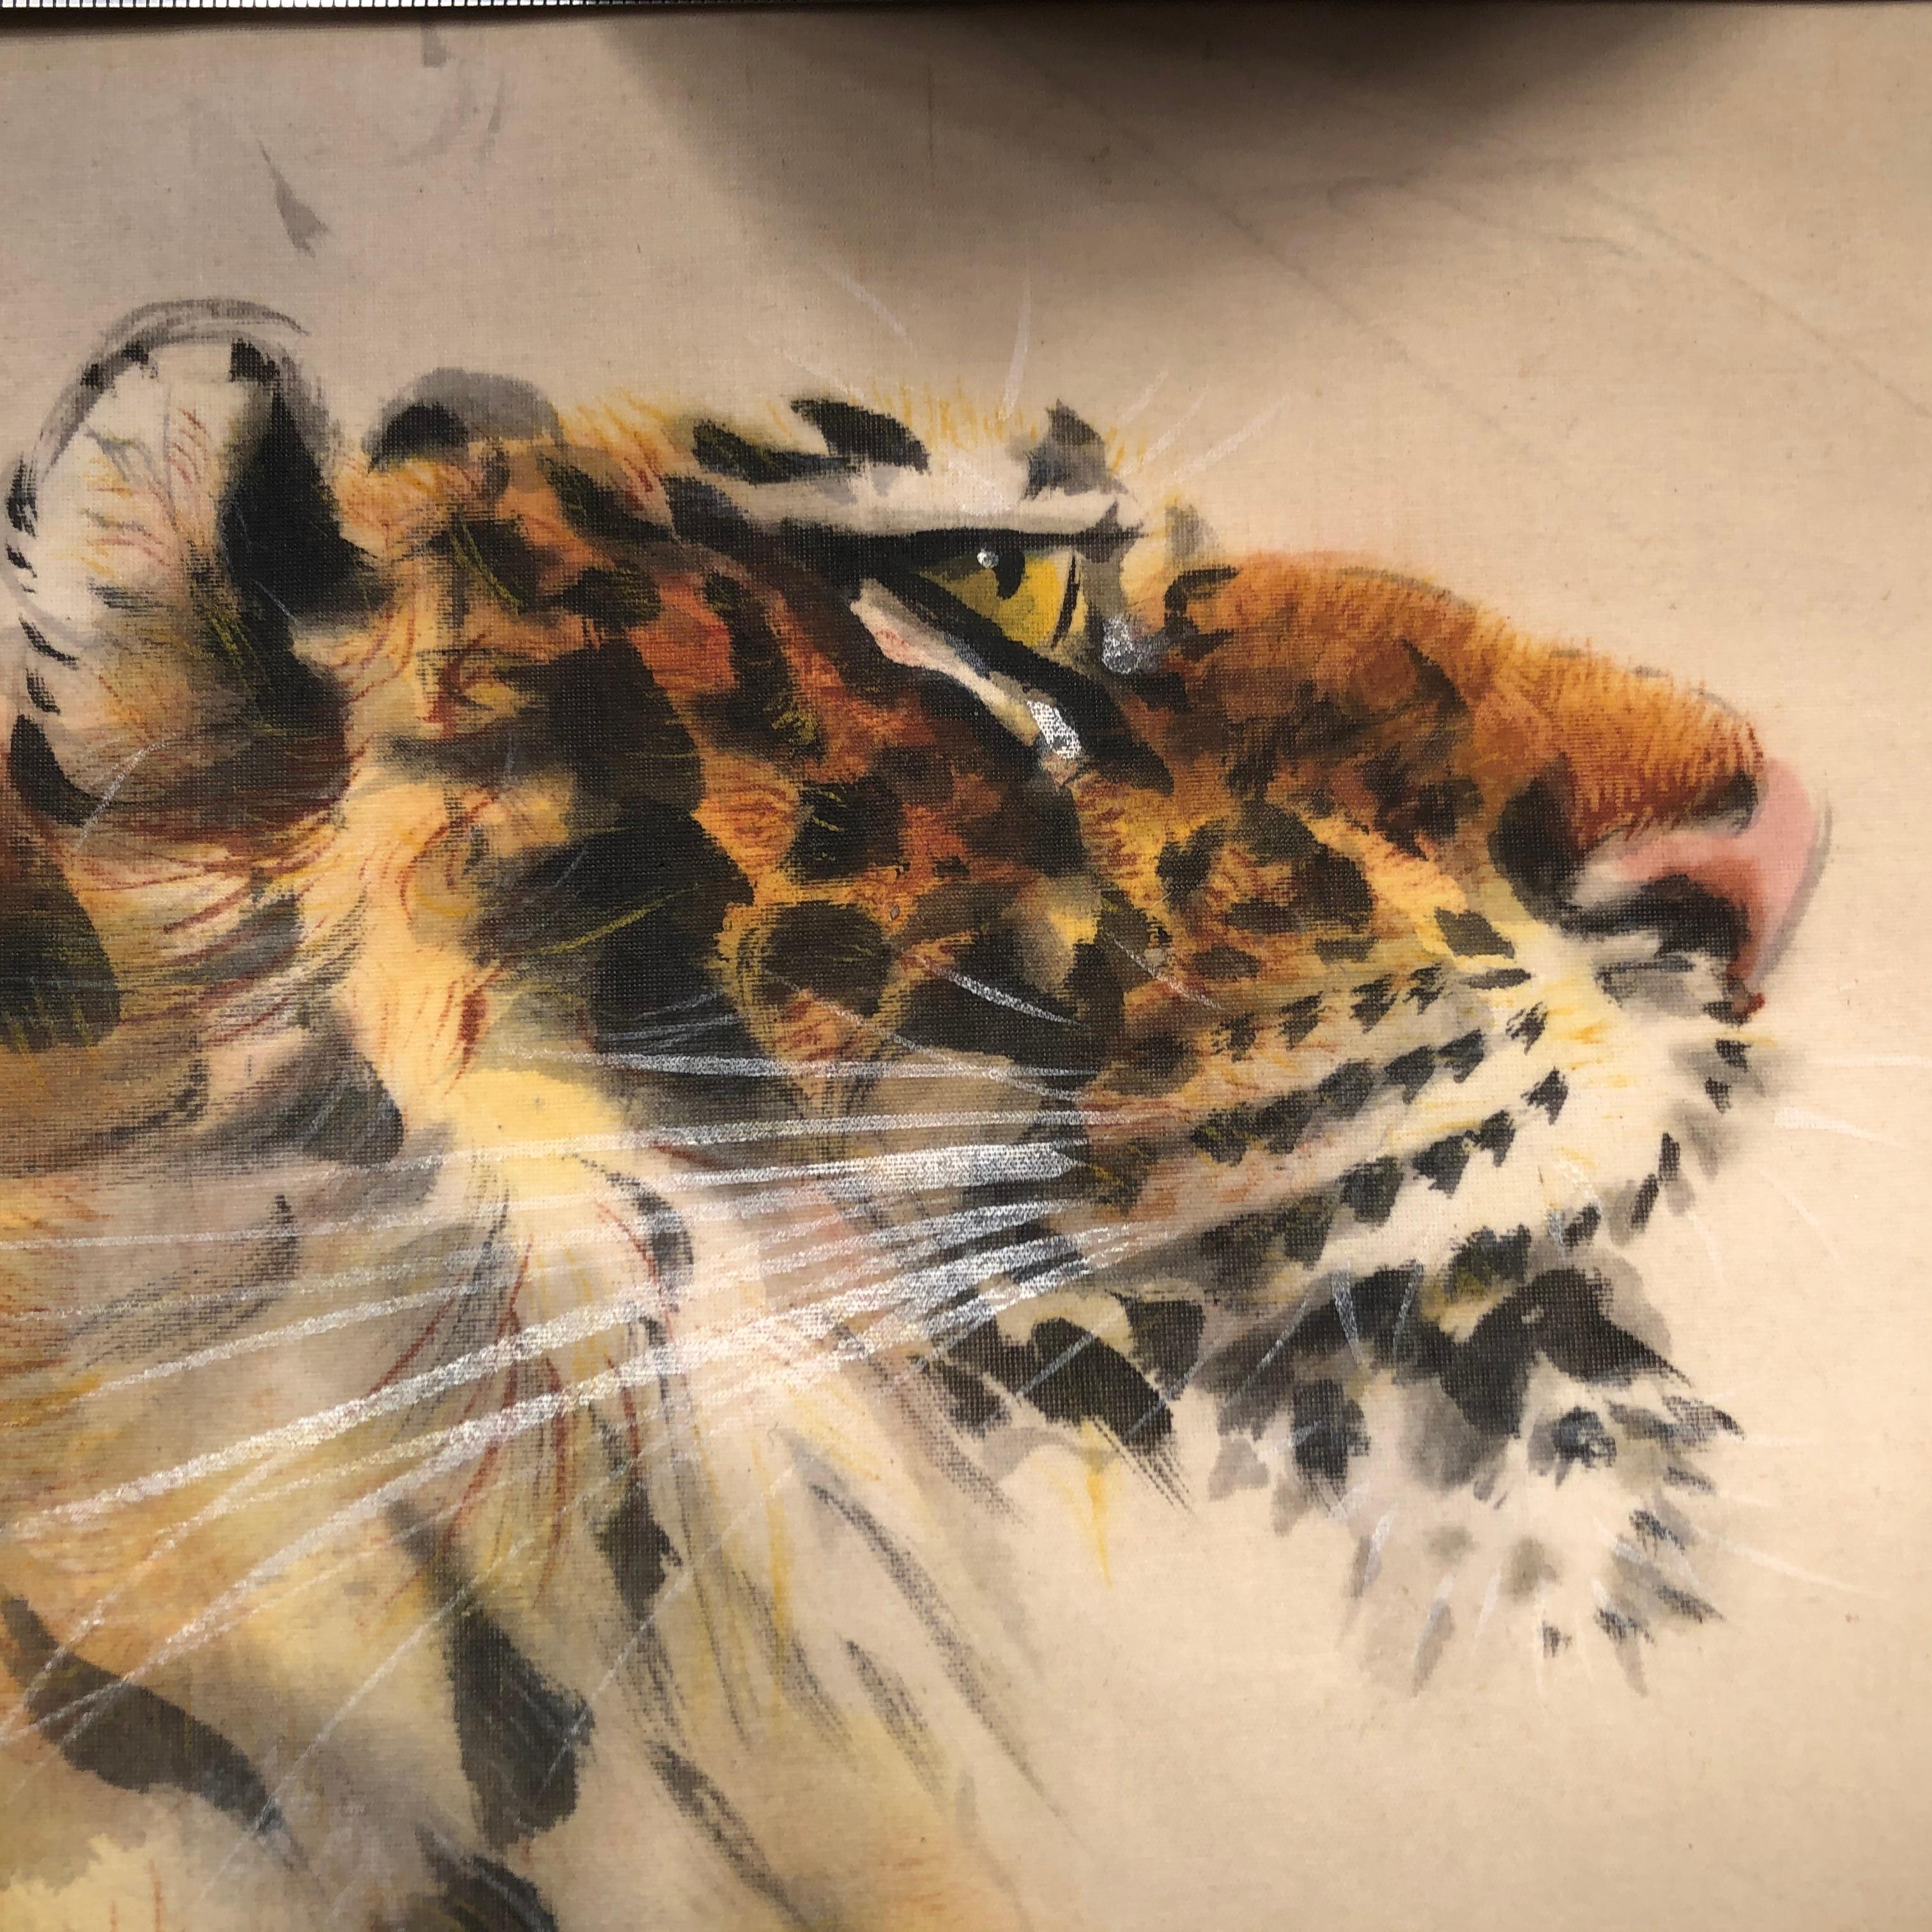 From our Recent Japanese Acquisition Travels

A beautiful and compelling Japanese antique hand painted painting of a stealthy tiger - ready to mount in your favorite frame and proudly display or give as a unique gift. .

Hand painting on silk in